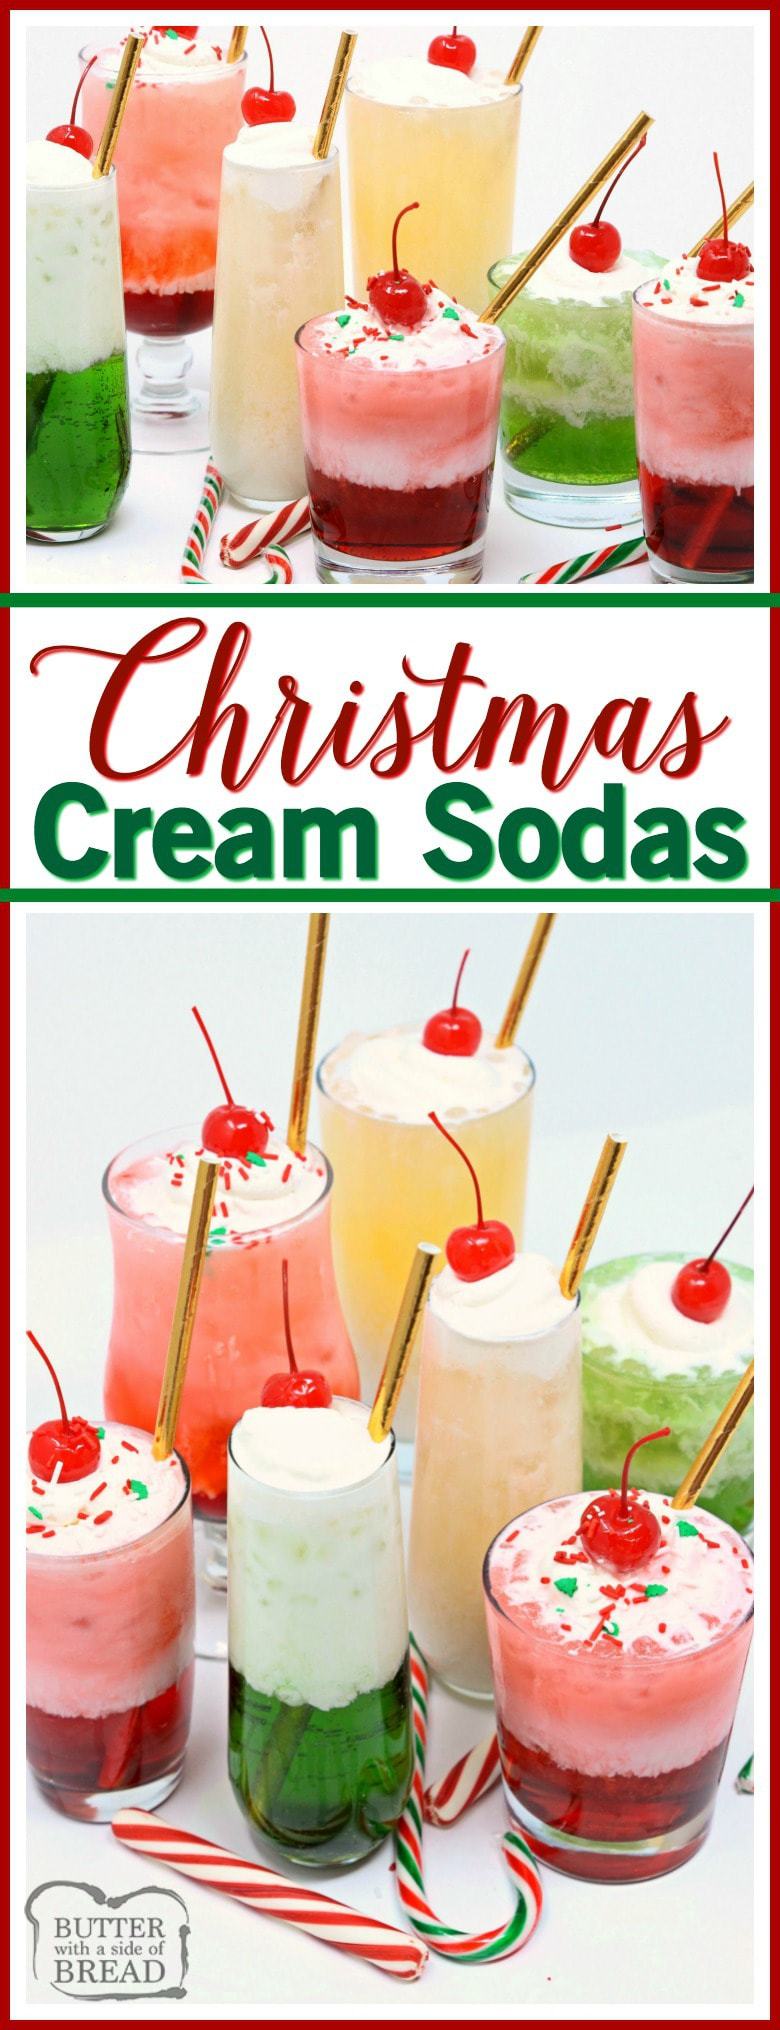 Christmas Cream Sodas made with sweet syrups, cream & club soda are a delicious & festive addition to any holiday party! Delicious mocktail that's so easy! Perfect #Christmas #drink #recipe from Butter With A Side of Bread #beverage #mocktail #holidays